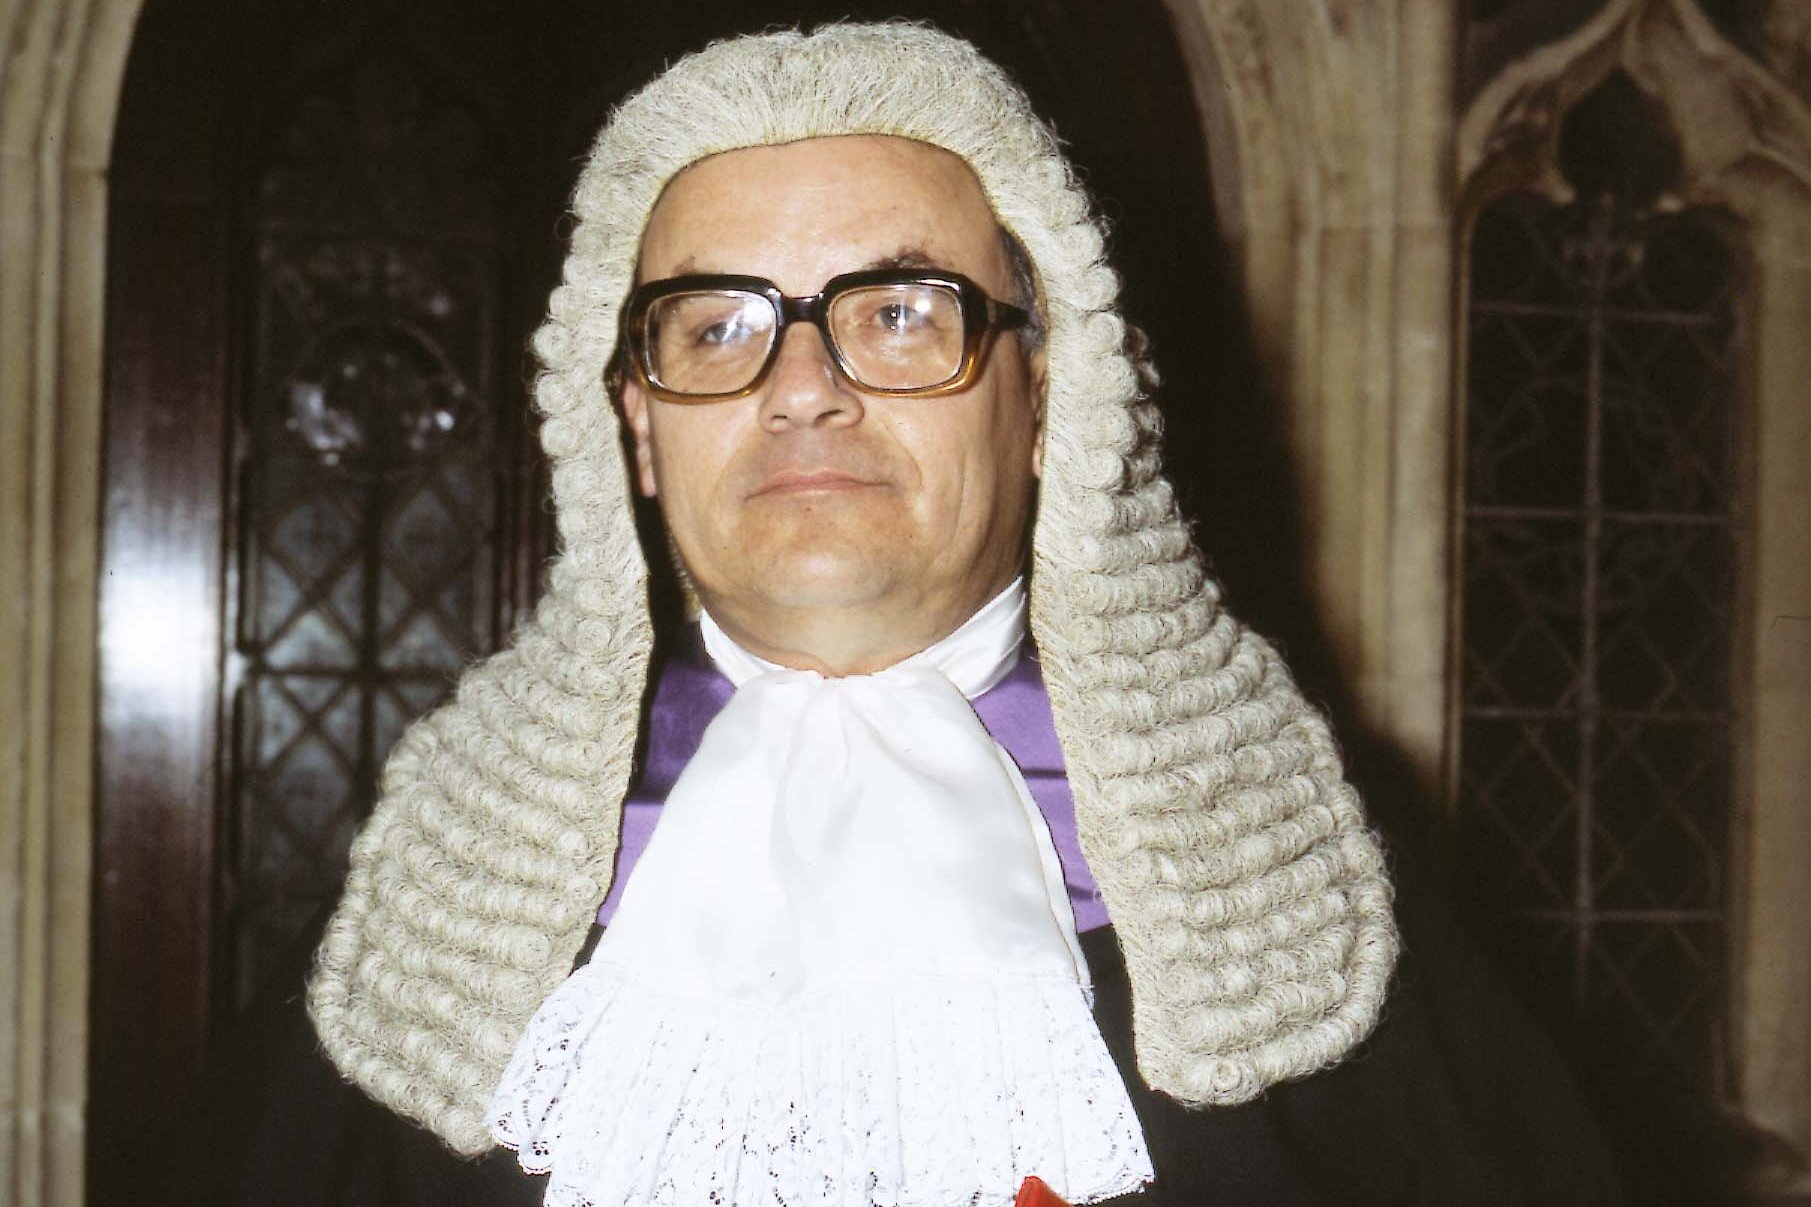 Stephens in 1986. He was best known for his media order in the case of the former MI5 intelligence officer David Shayler, which was quashed